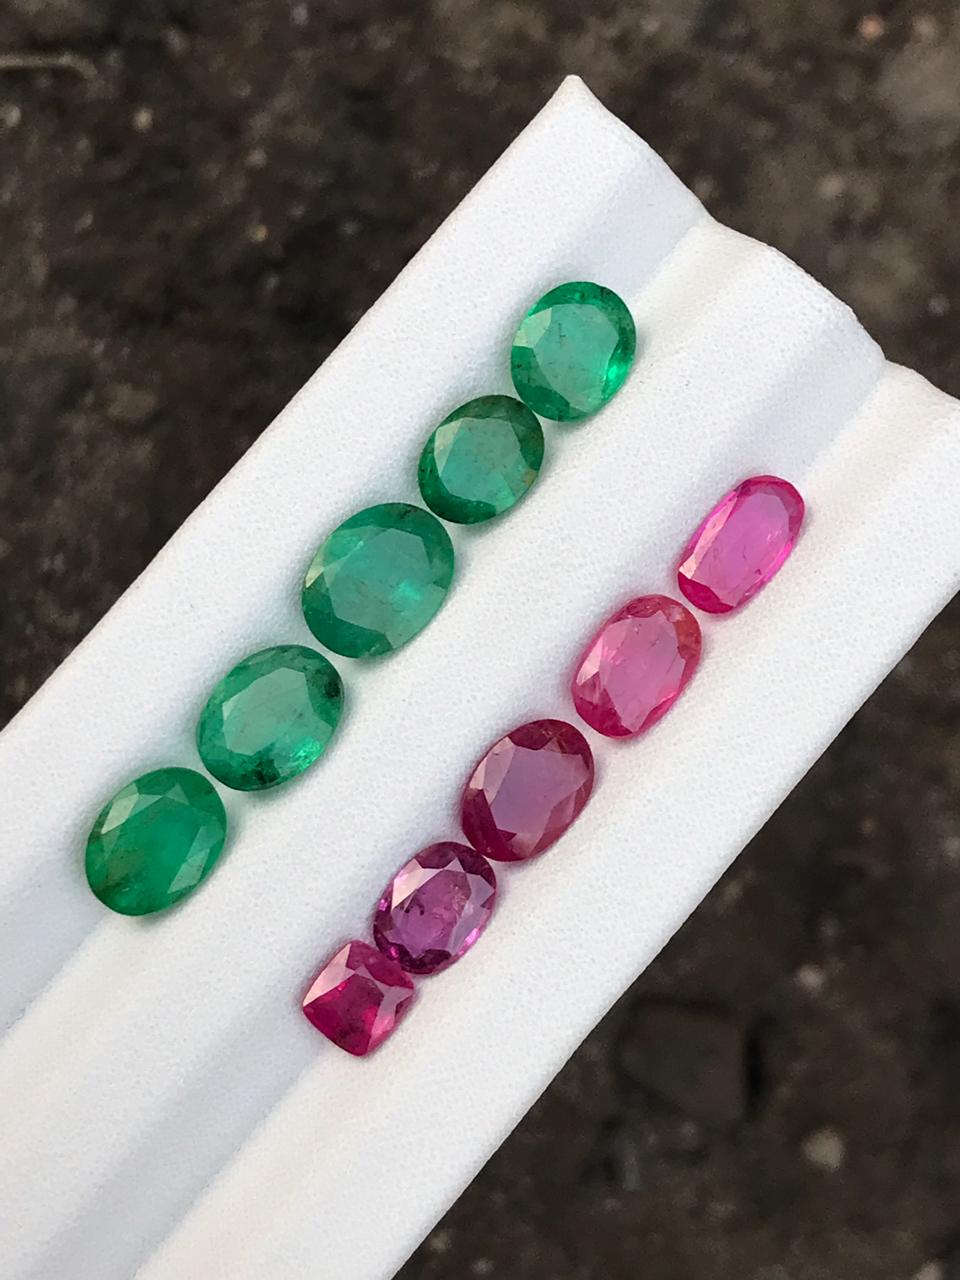 Zambian Emeralds with Afghan Ruby Collection